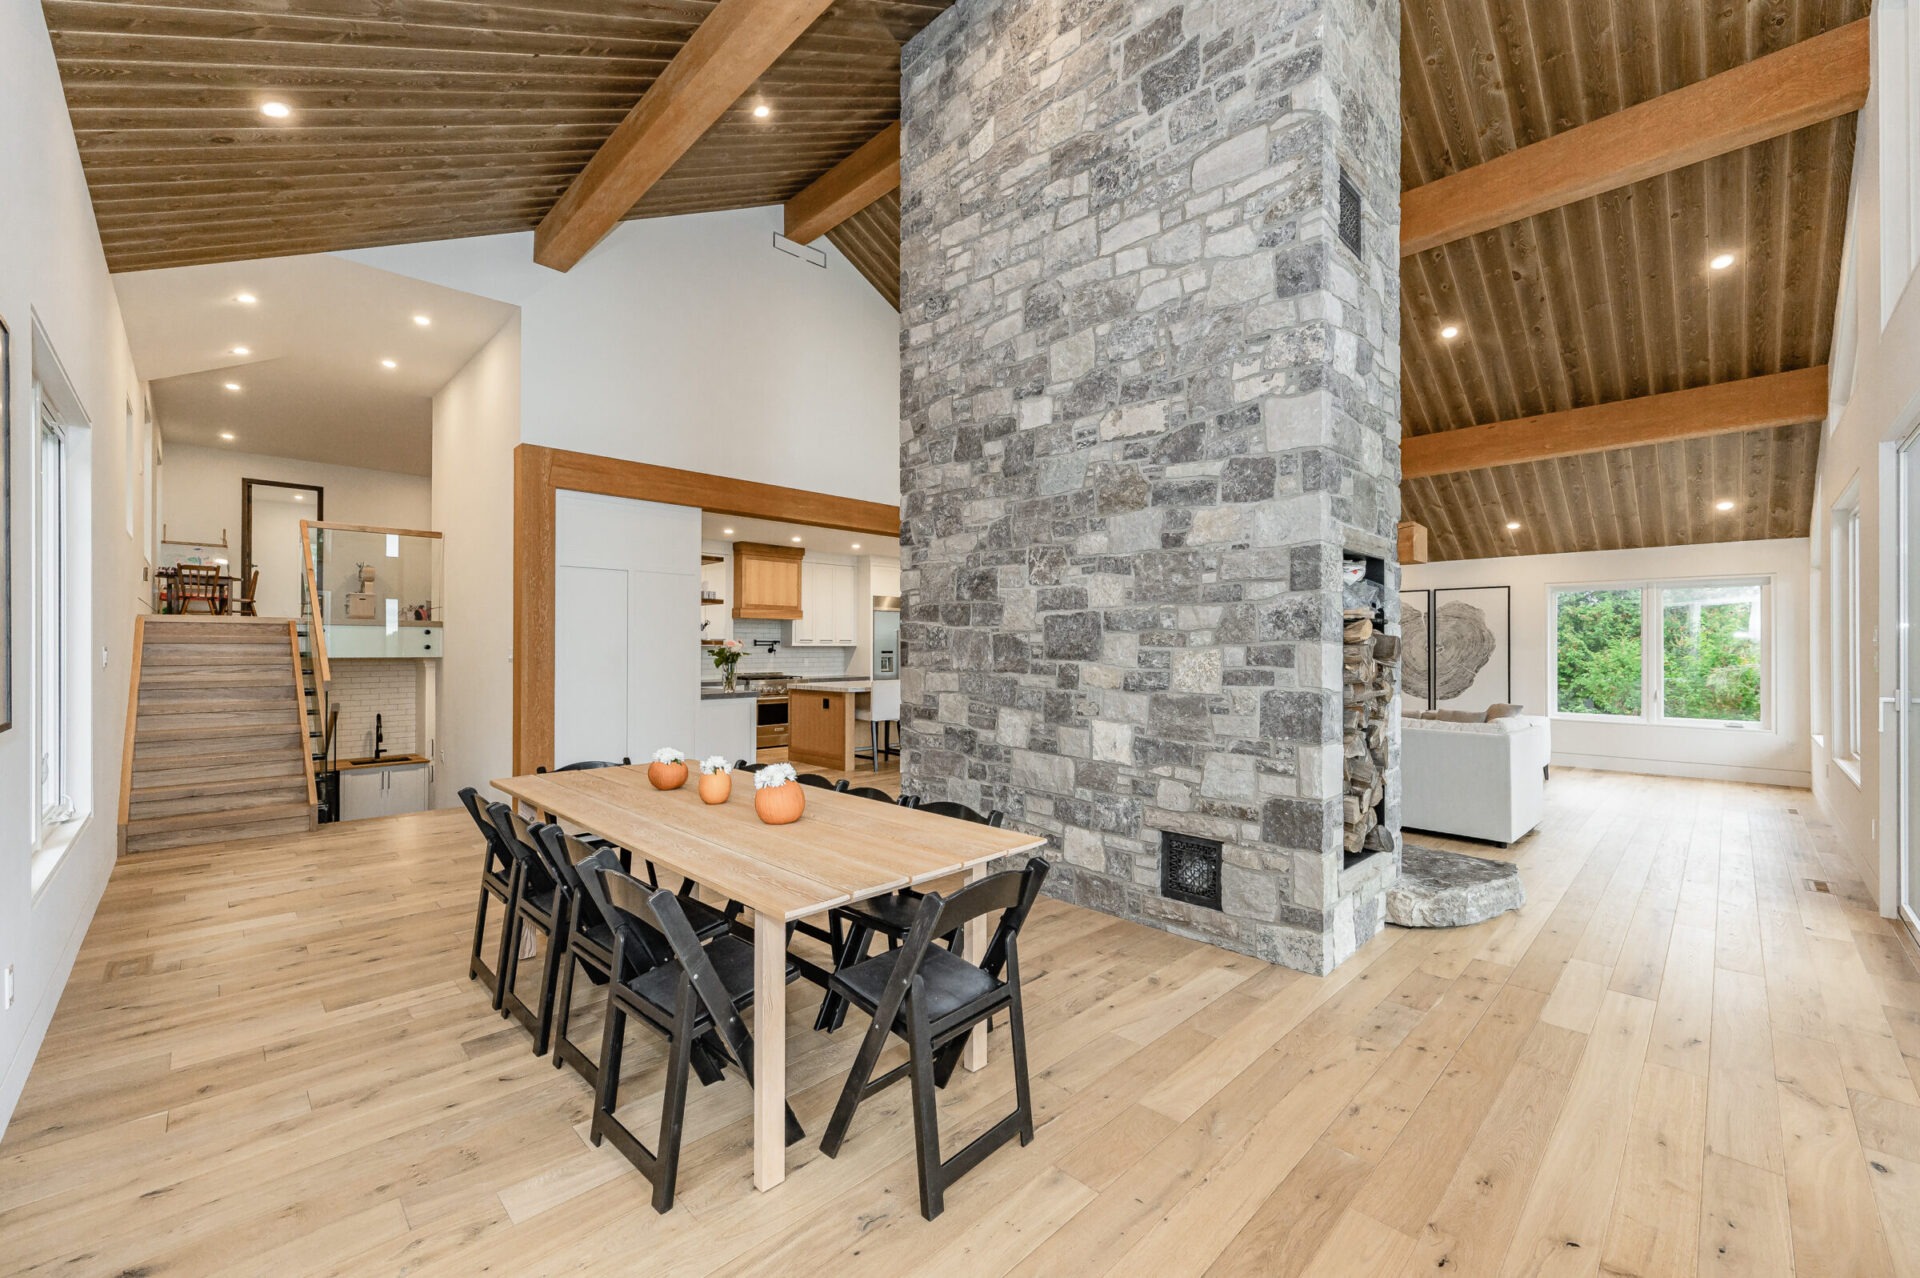 Modern interior with a wooden dining table, black chairs, stone fireplace, exposed beams, and an open plan layout leading to a kitchen and living area.